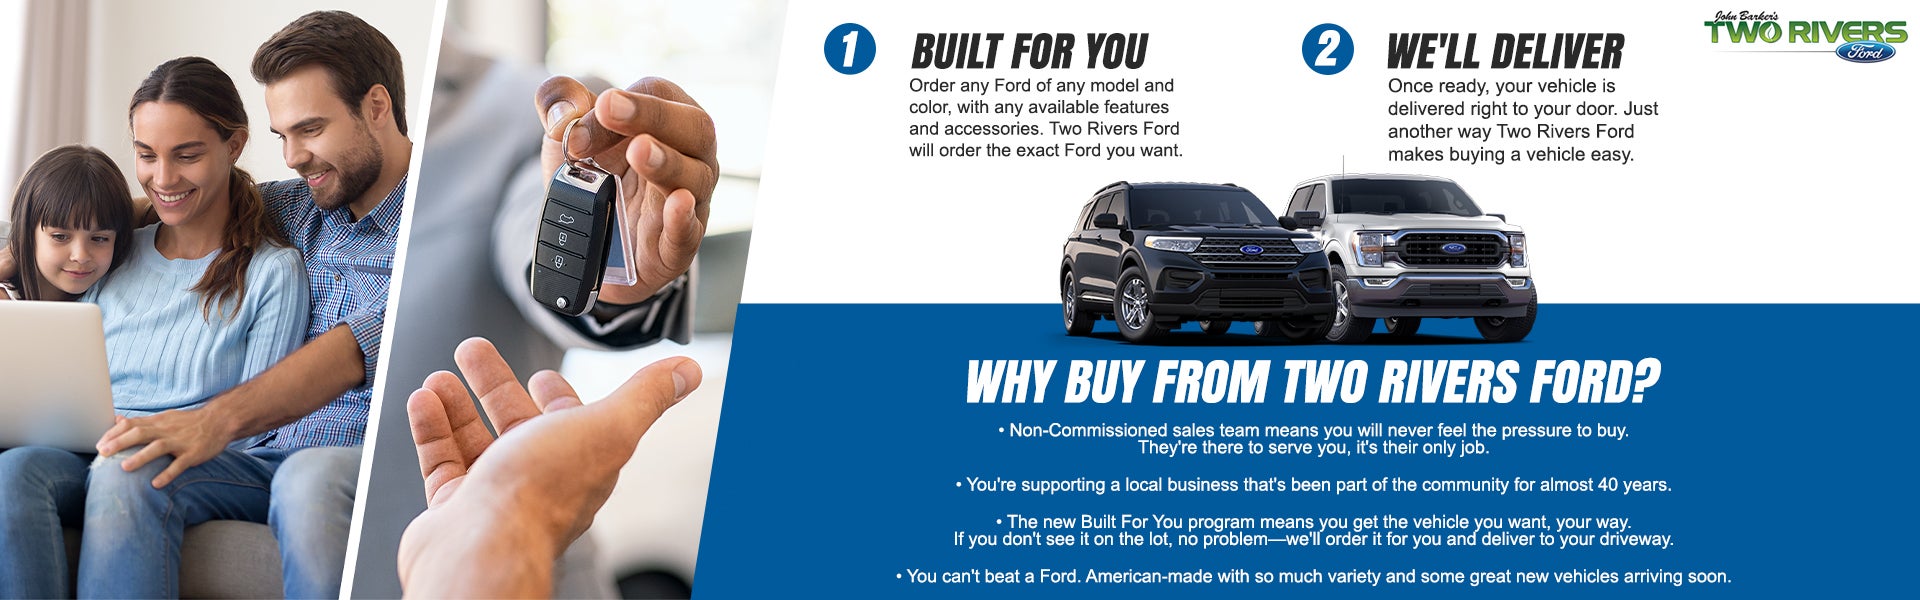 Buy From Two Rivers Ford